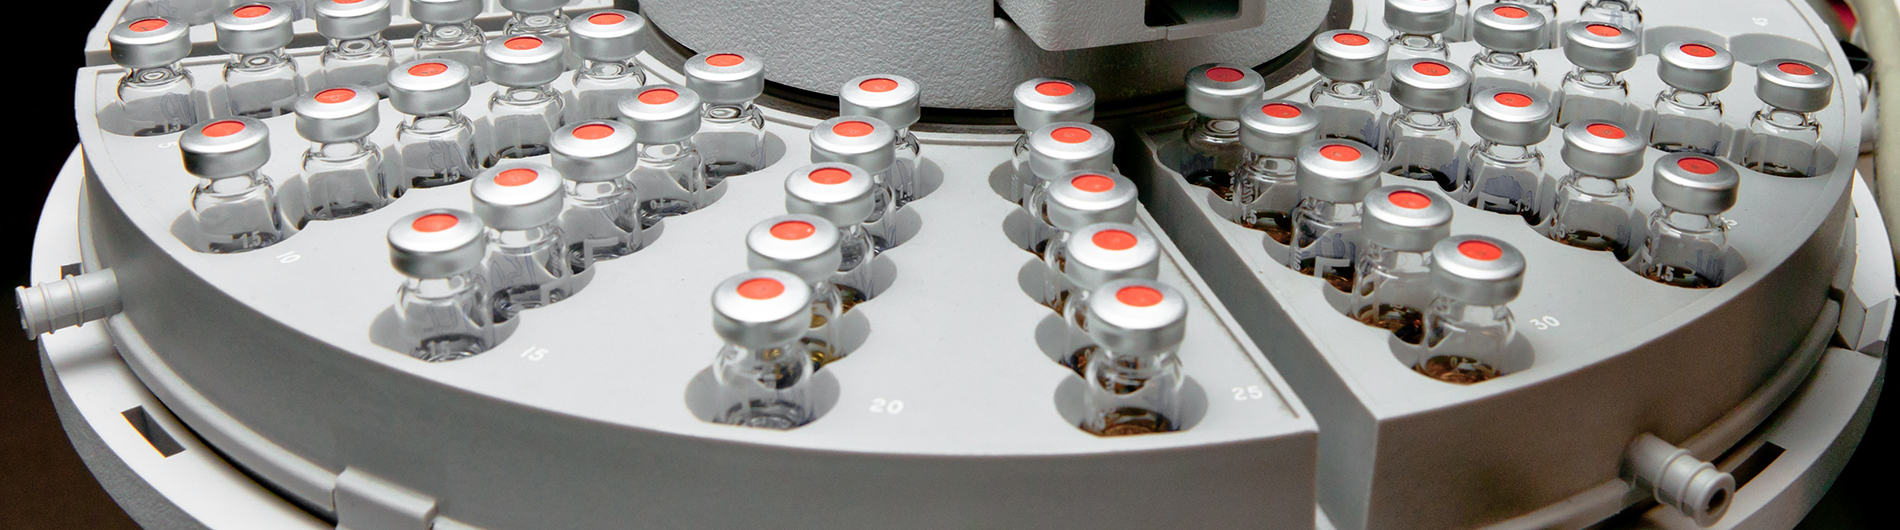 Glass phials sit in a sample carousel after analysis in a laboratory machine.